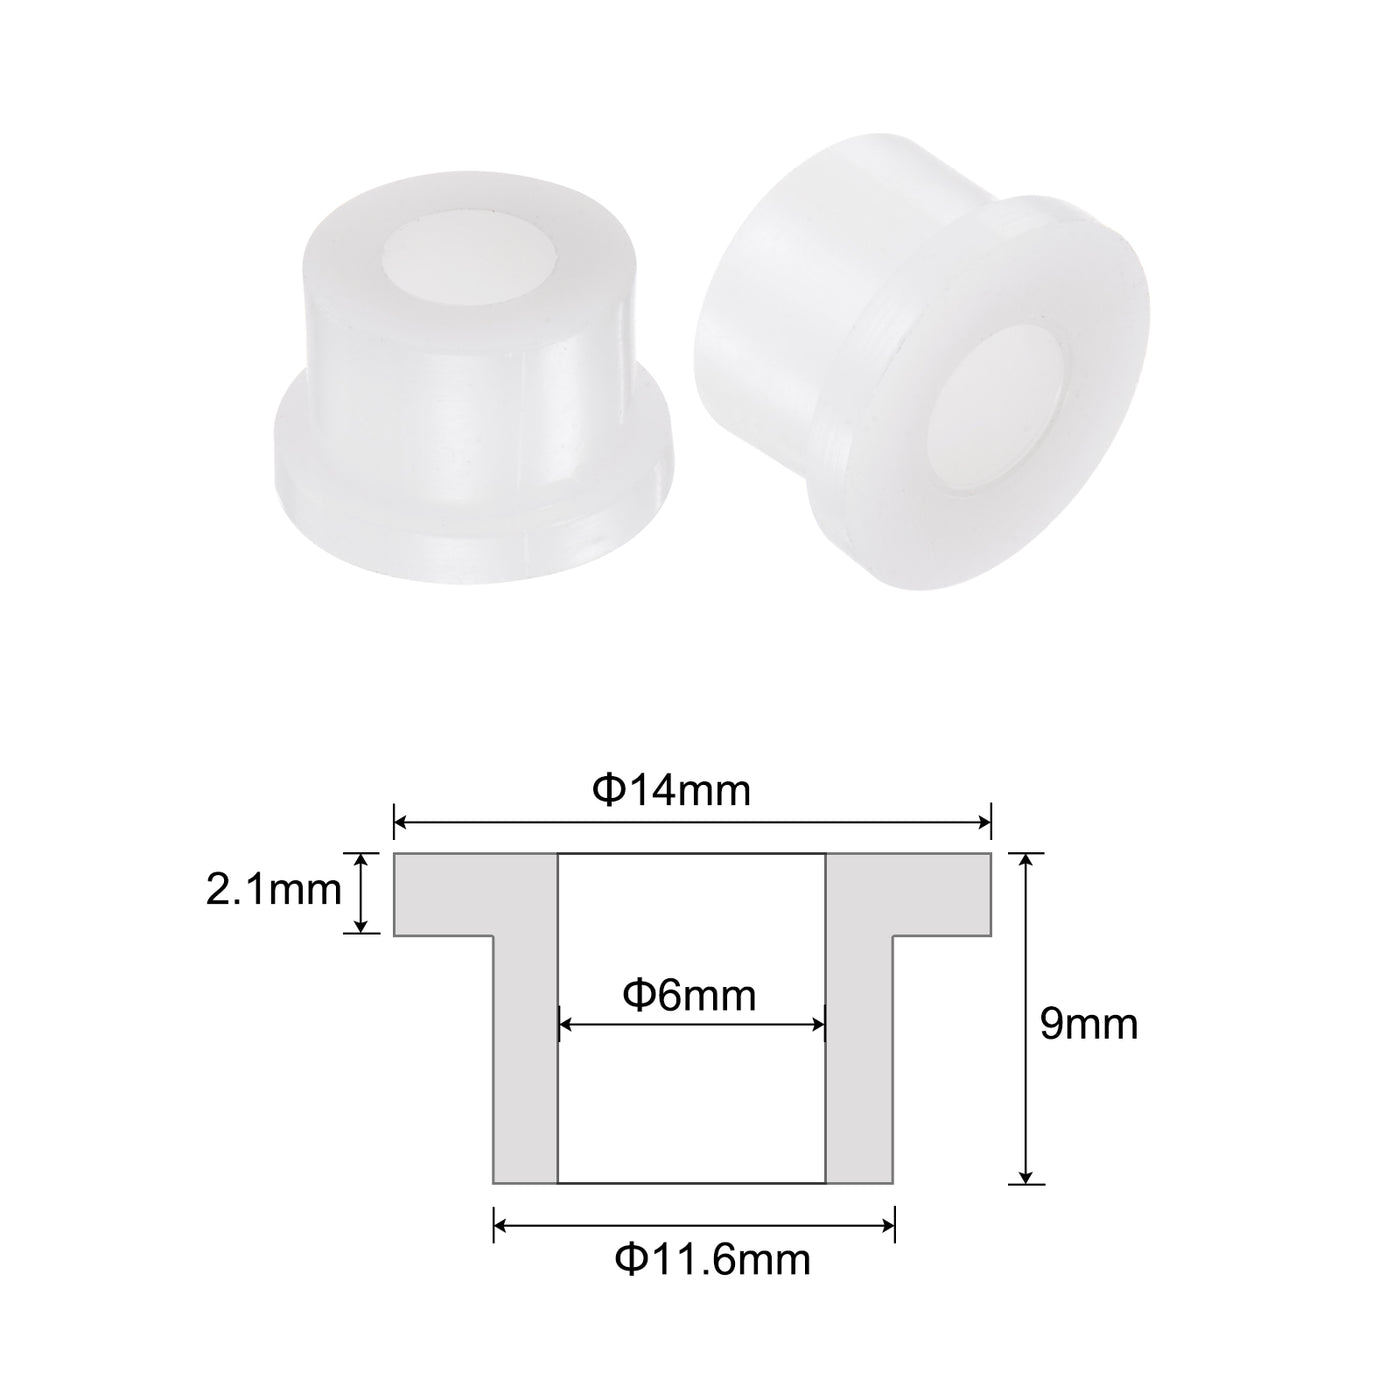 uxcell Uxcell 12pcs Flanged Sleeve Bearings 6mm ID 11.6mm OD 9mm Length Nylon Bushings, White